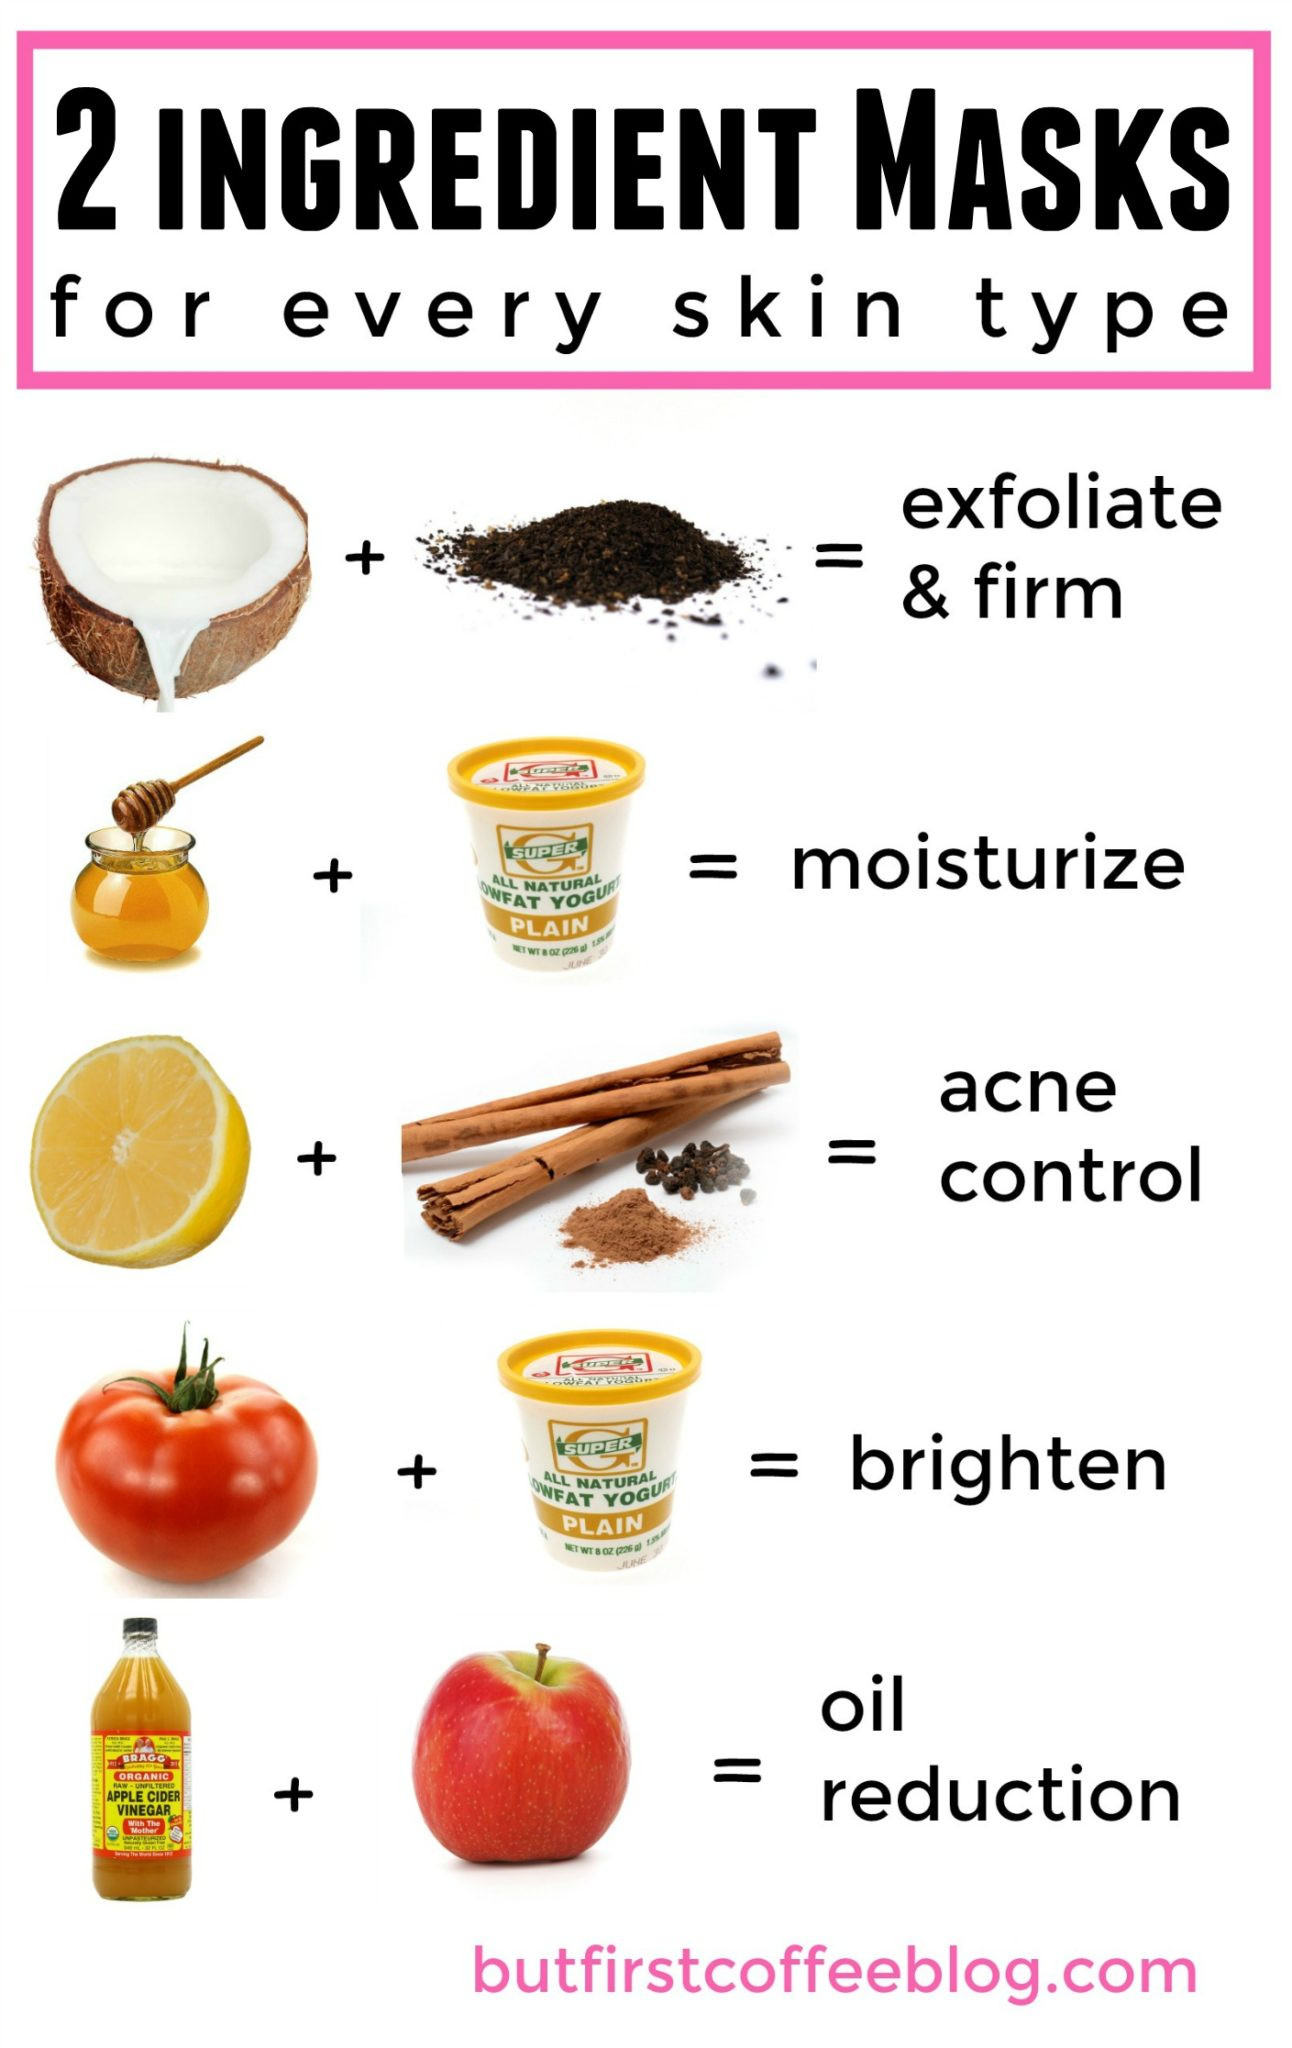 DIY Face Mask For Oily Skin And Acne
 2 Ingre nt D I Y Face Masks for Every Skin Type